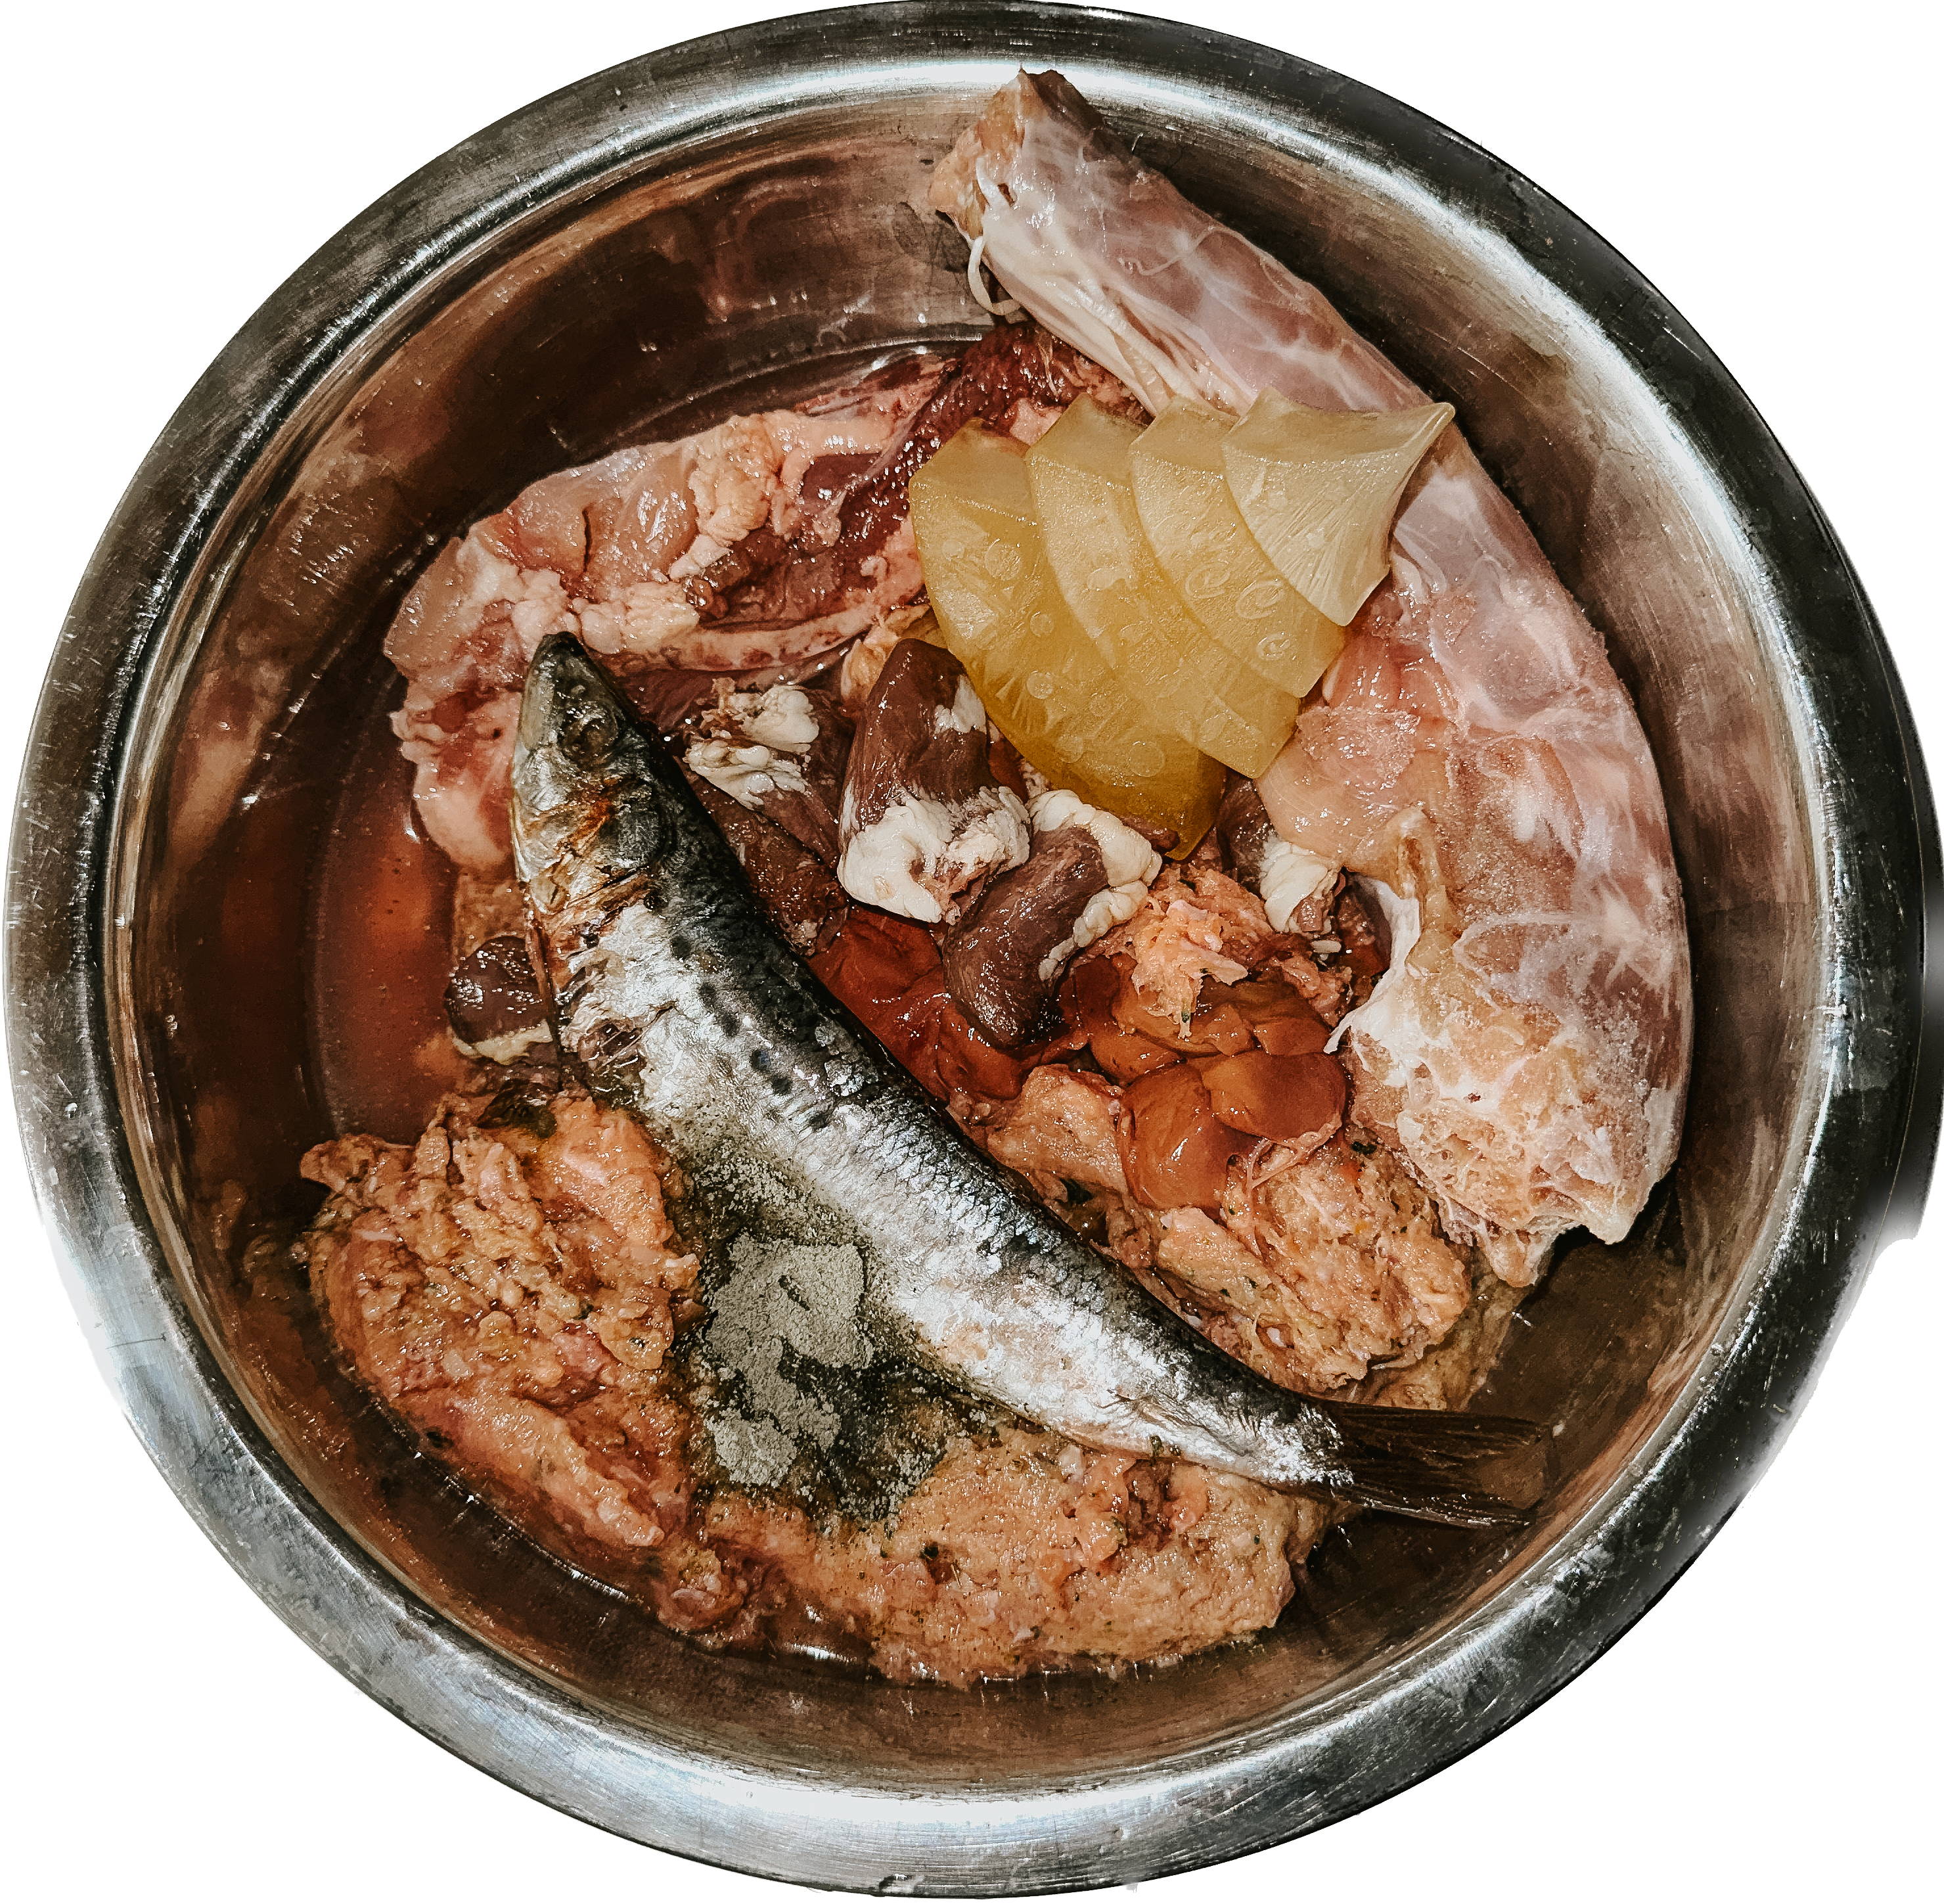 Silver dog bowl filled with raw meat, bones, supplements, and a sardine.